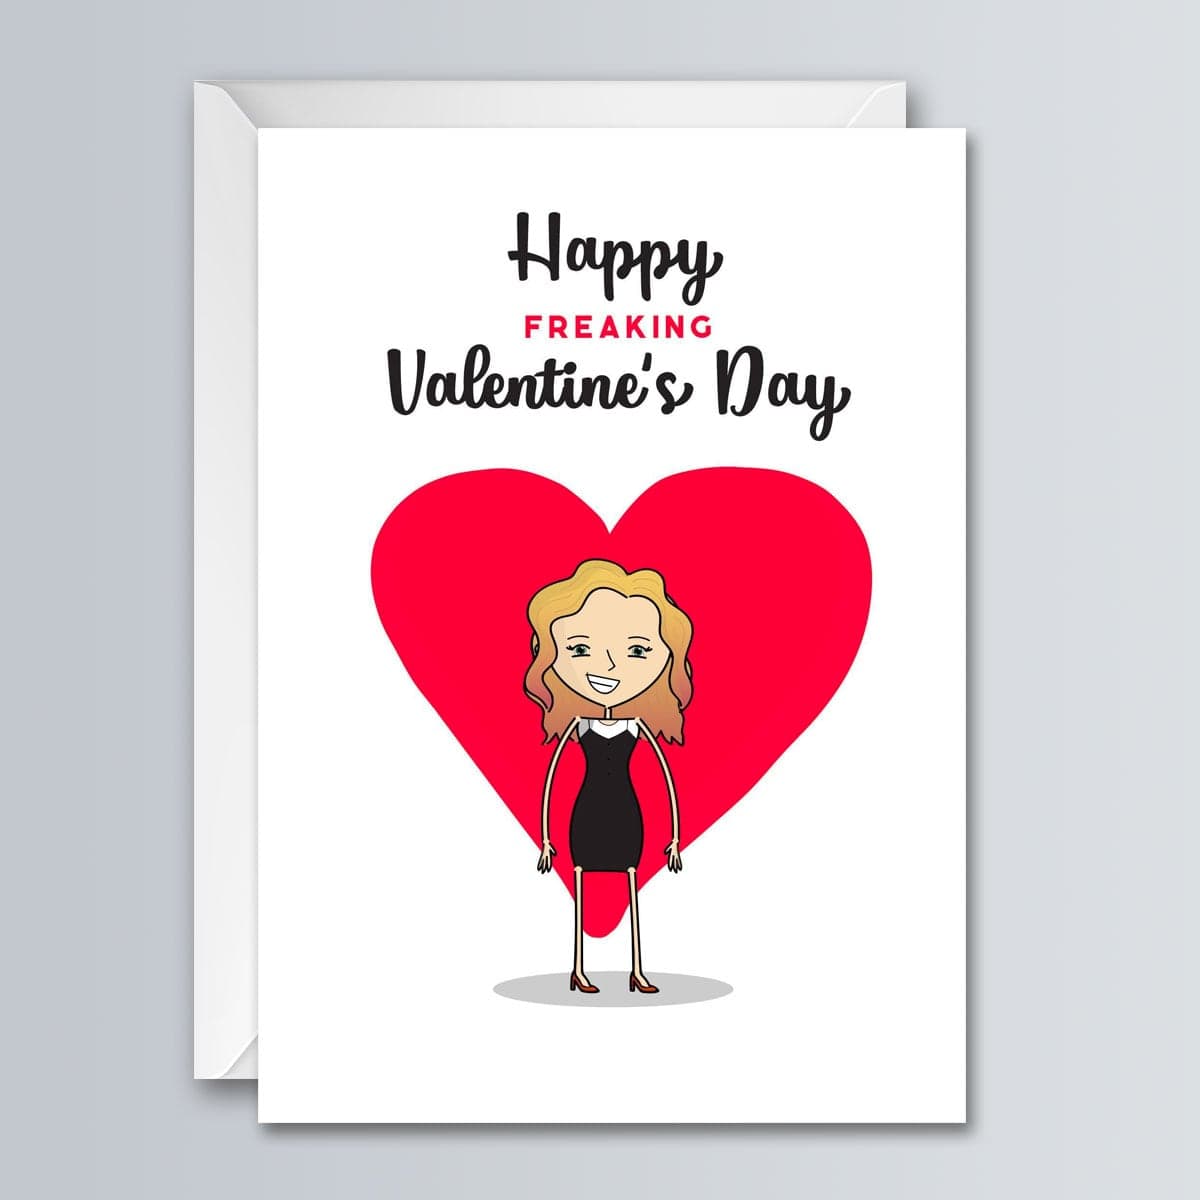 Happy Freaking Valentine's Day - Greeting Card